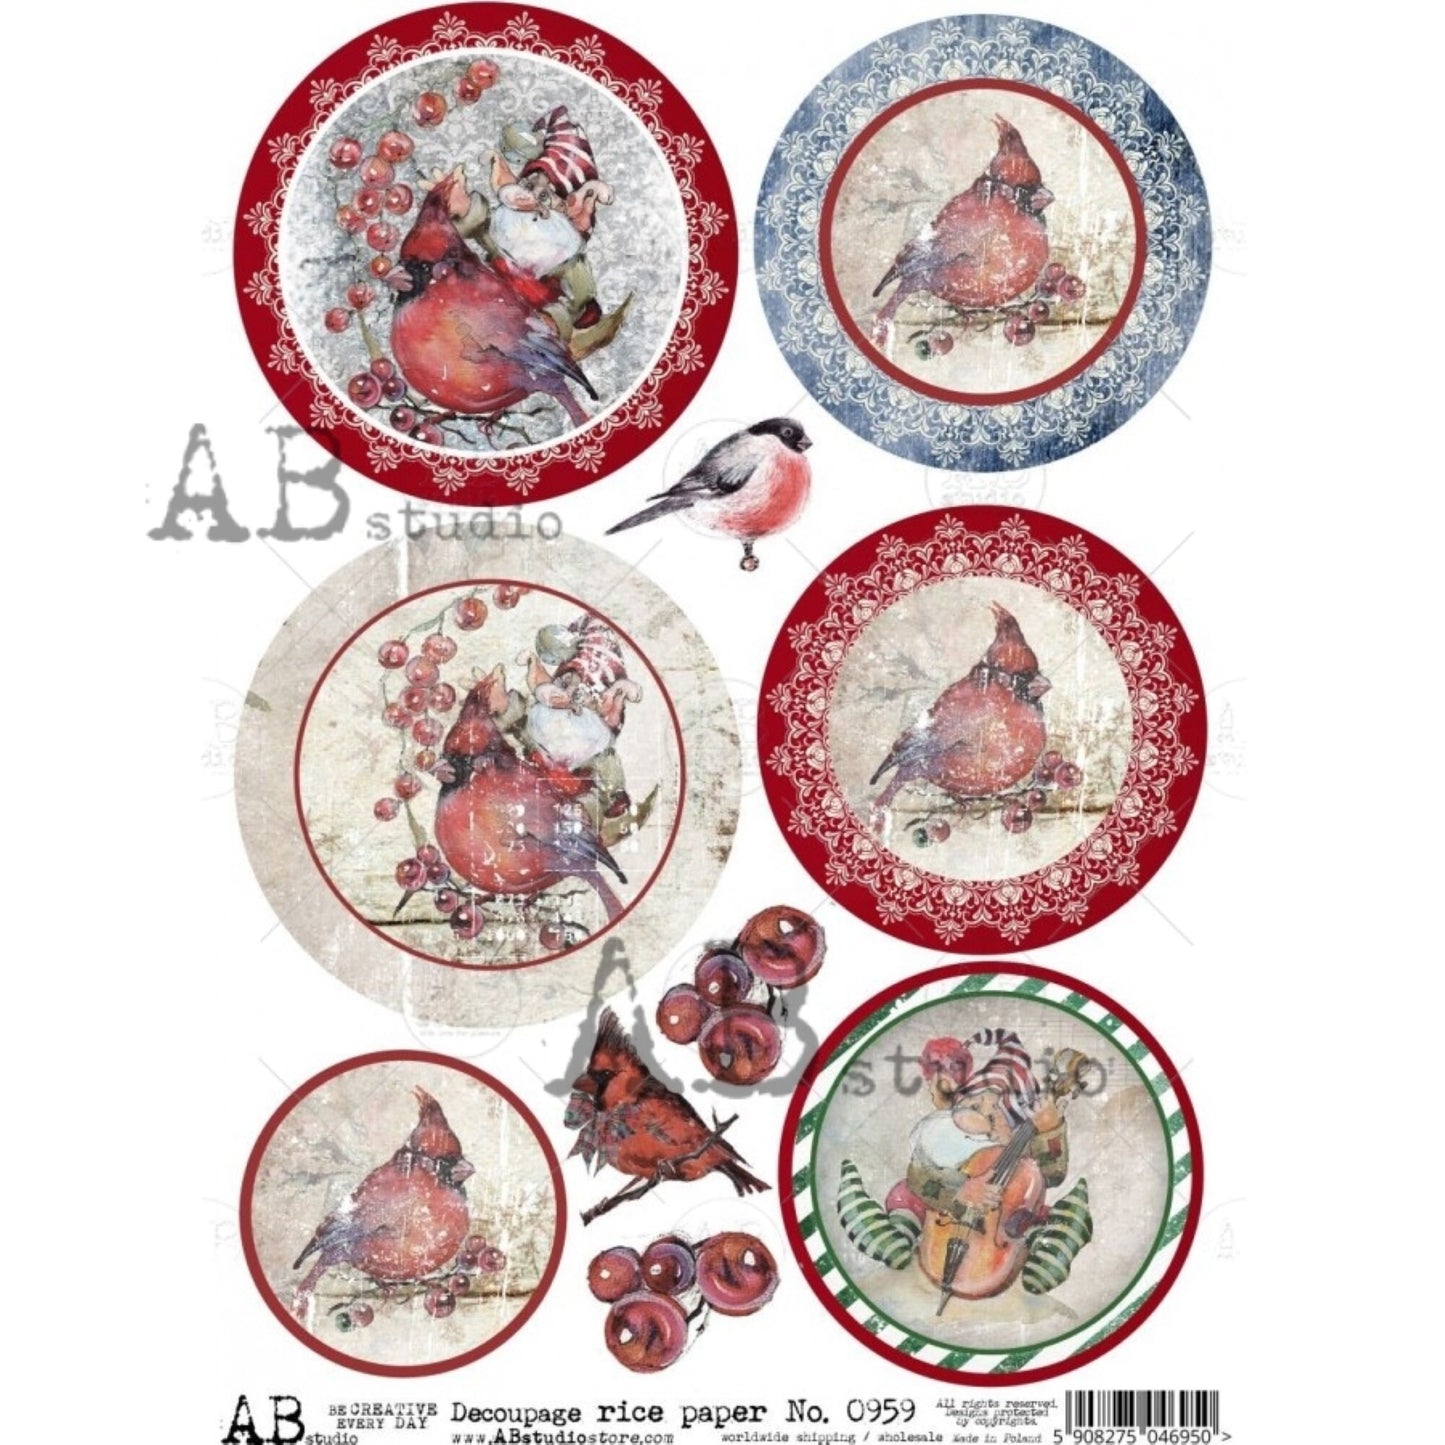 AB Studio, Christmas, Cardinal, Rounds, Ornaments, 0959, A4 8.27 X 11.69, Rice Paper for Decoupage Imported from Poland